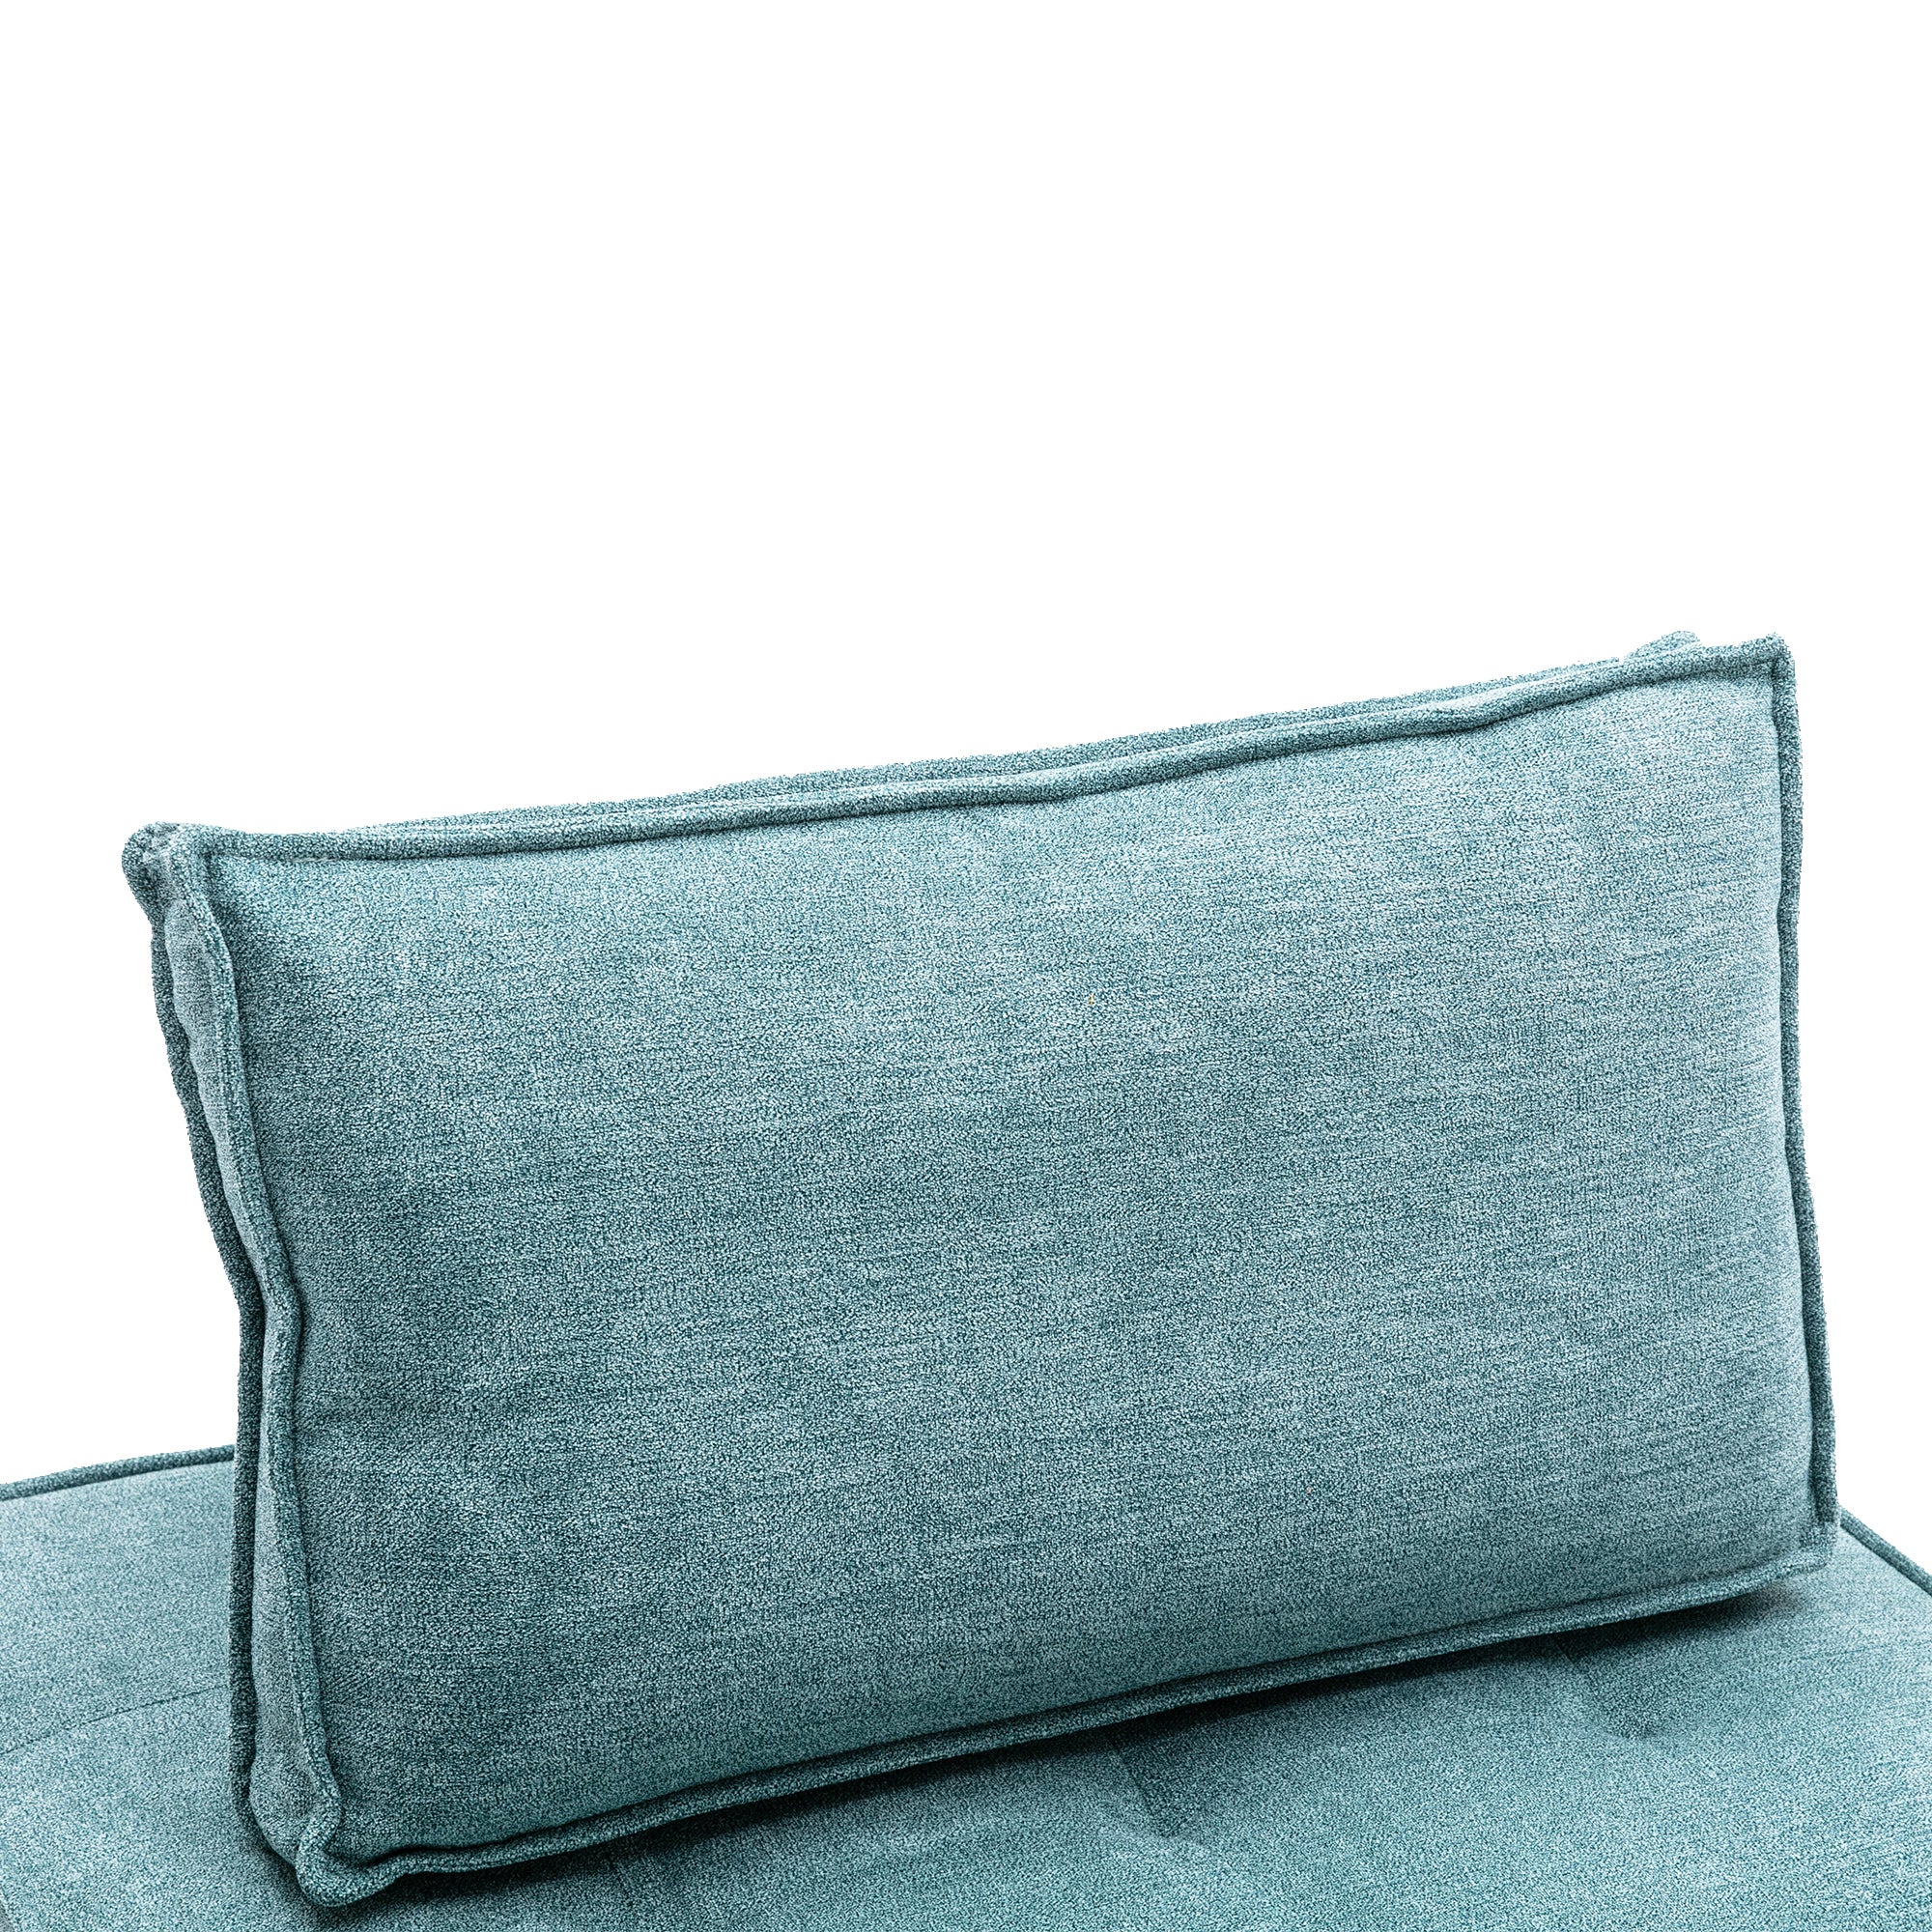 COOMORE LIVING ROOM OTTOMAN LAZY CHAIR teal-polyester